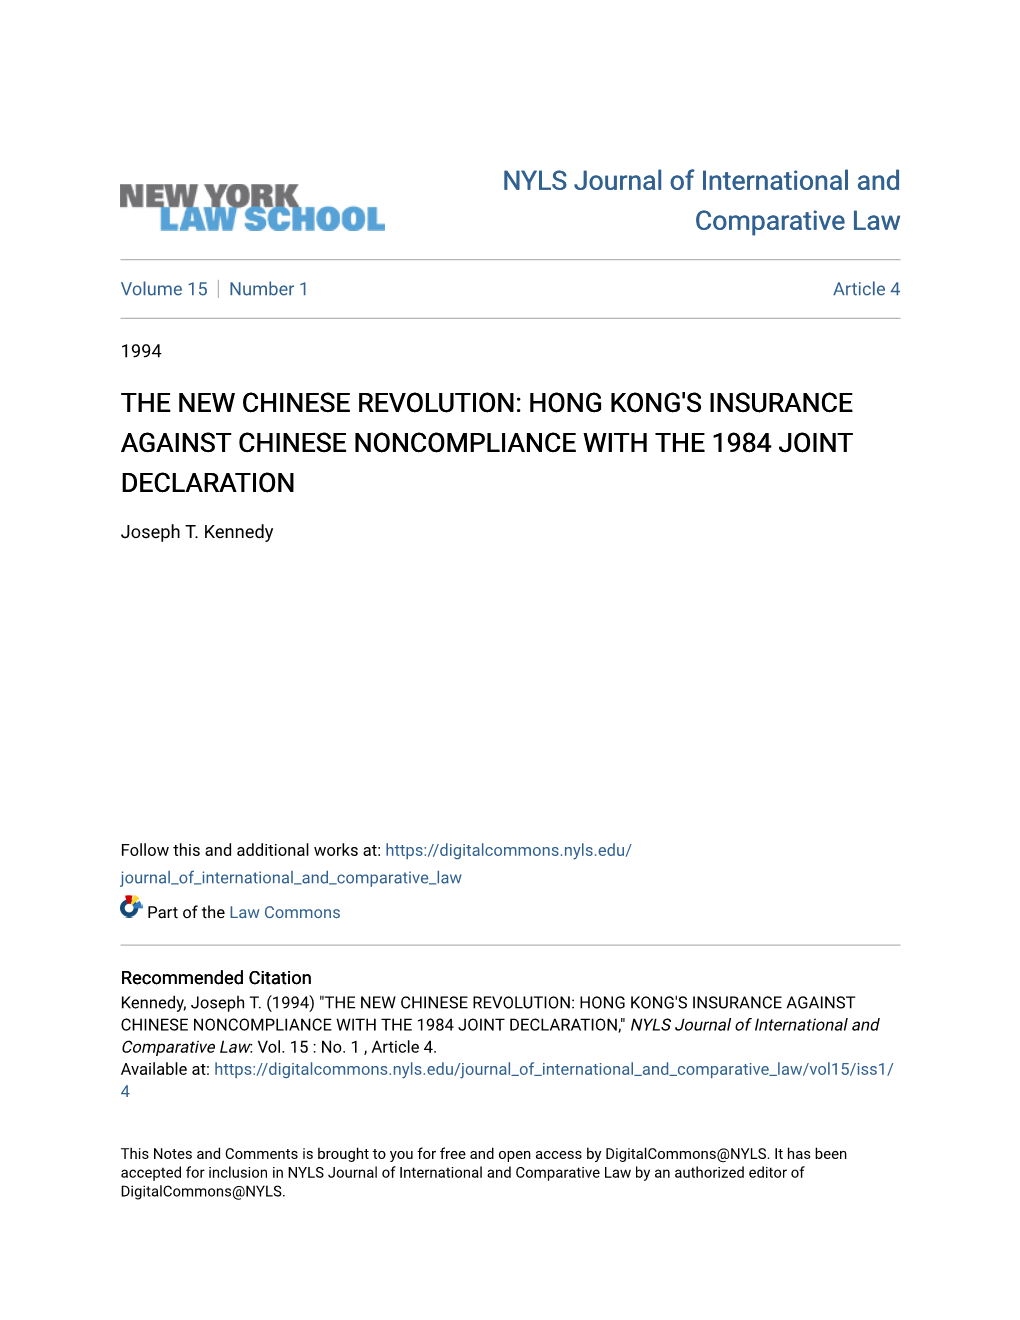 Hong Kong's Insurance Against Chinese Noncompliance with the 1984 Joint Declaration